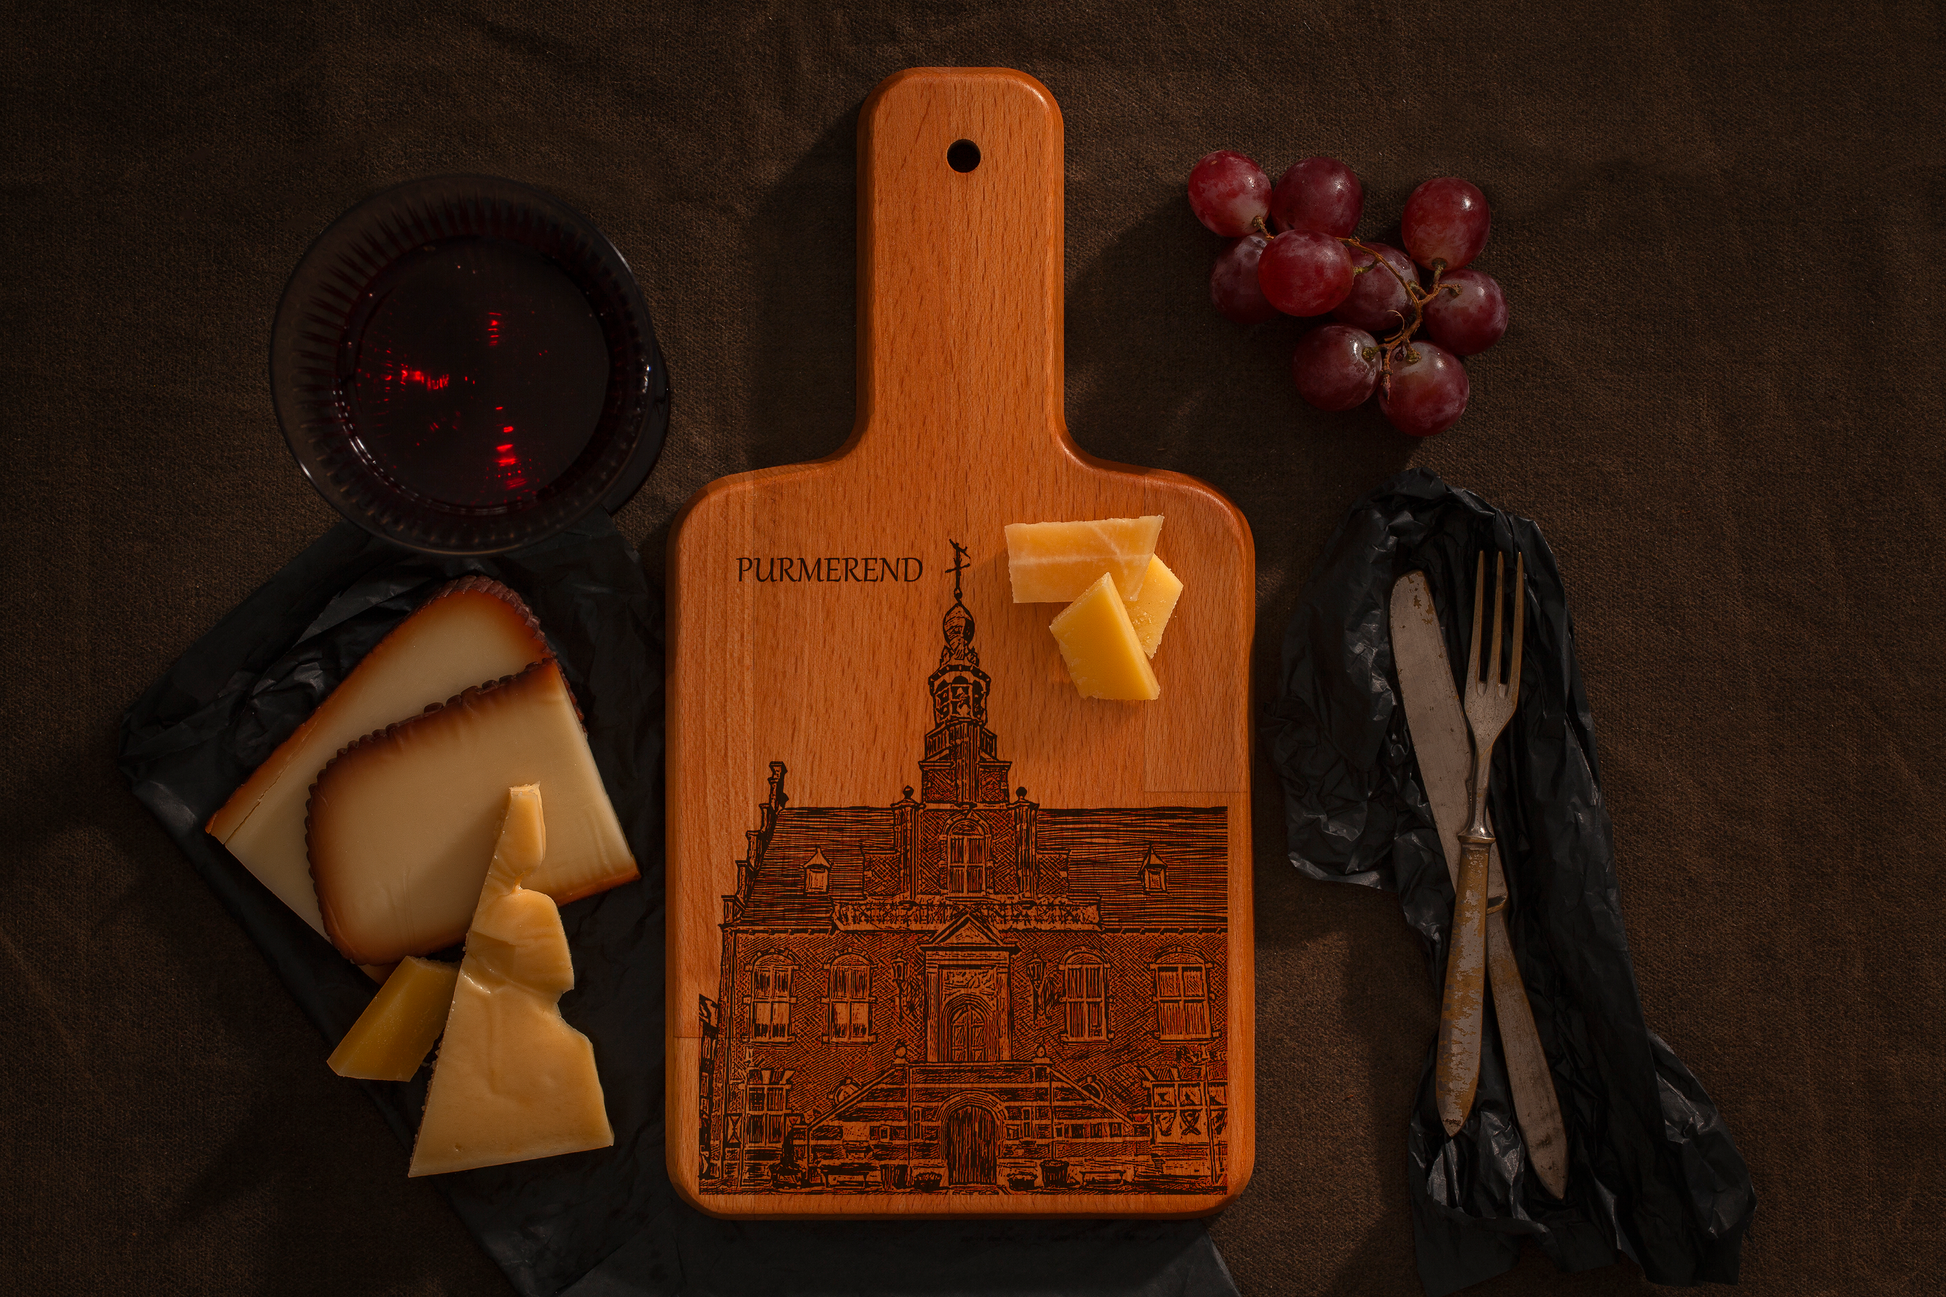 Purmerend, Stadhuis, cheese board, with cheese